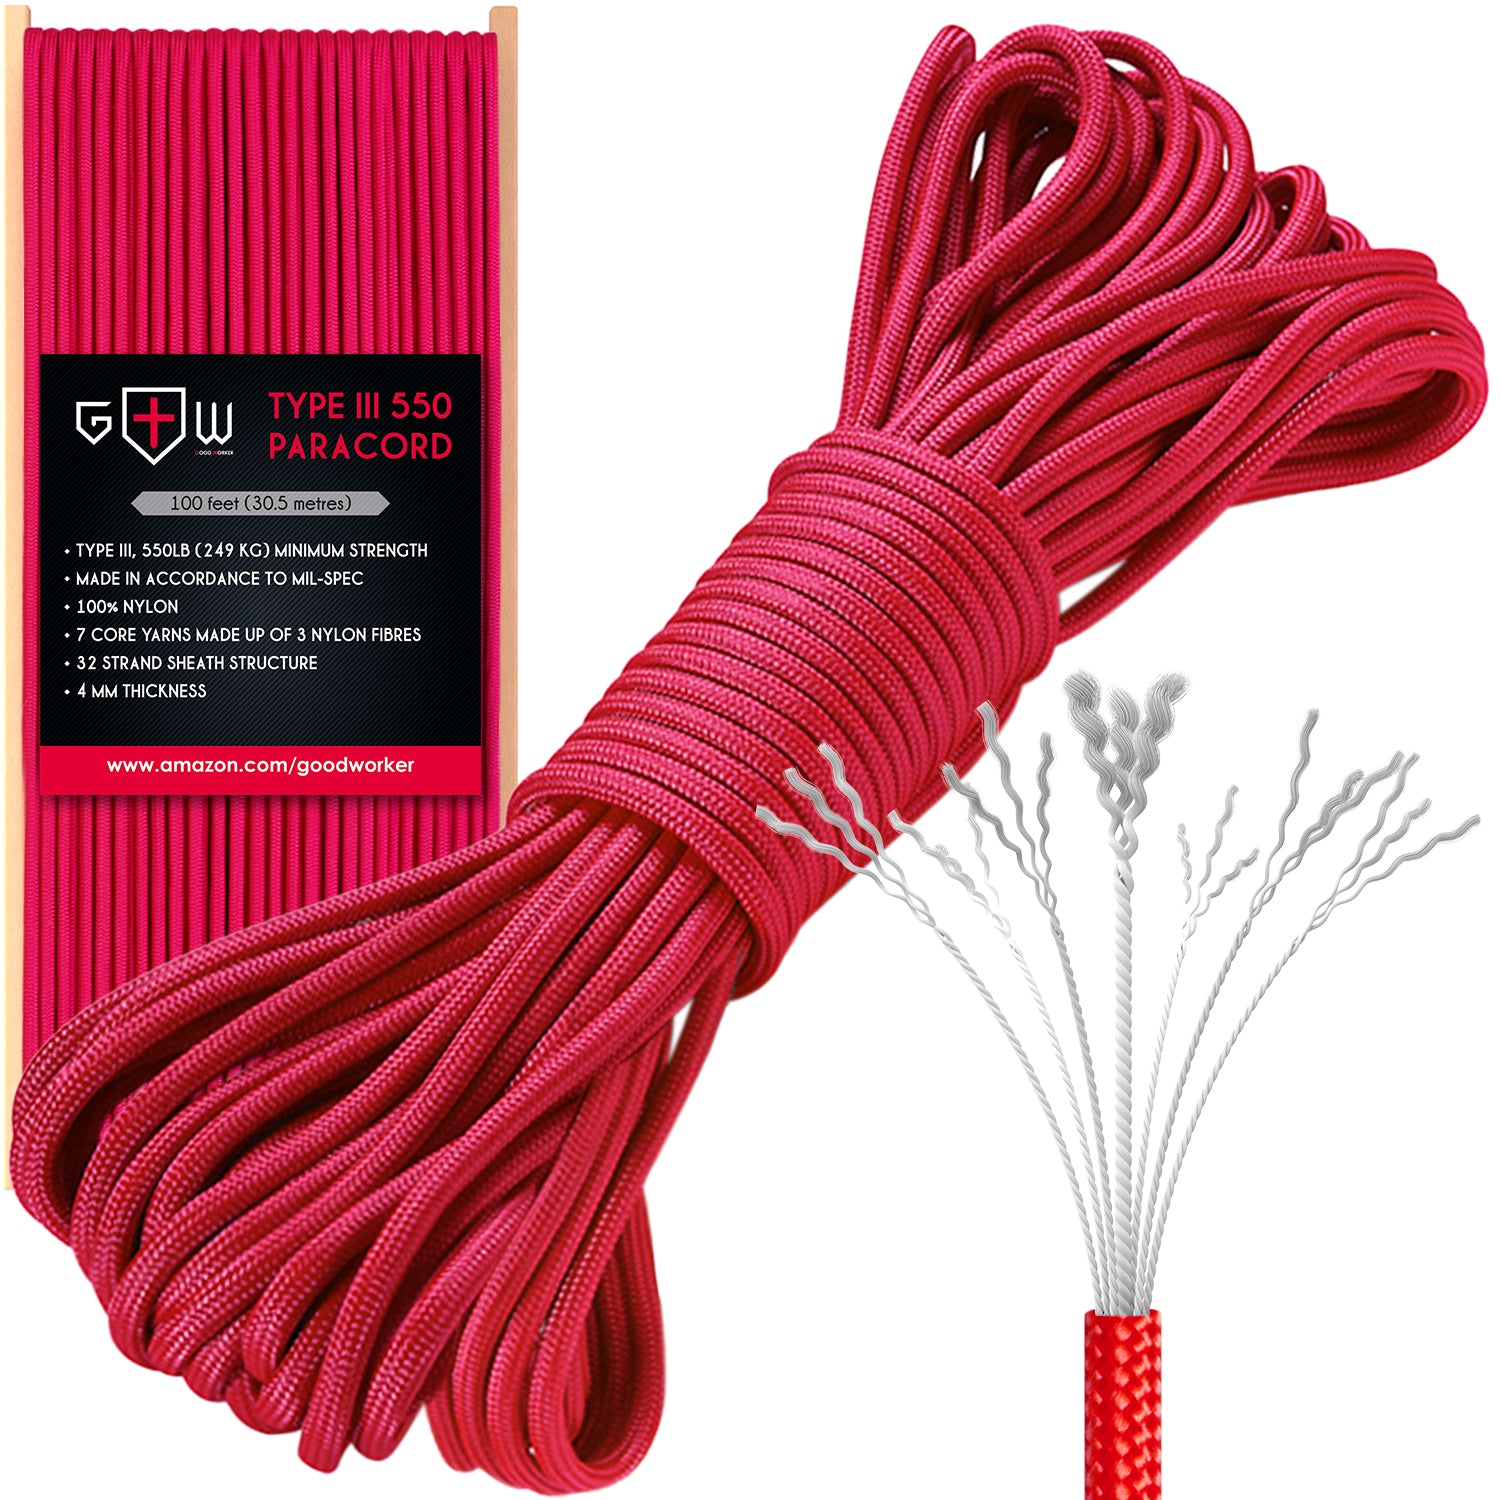 95 Paracord Imperial Red Made in the USA Nylon/Nylon. – Paracord